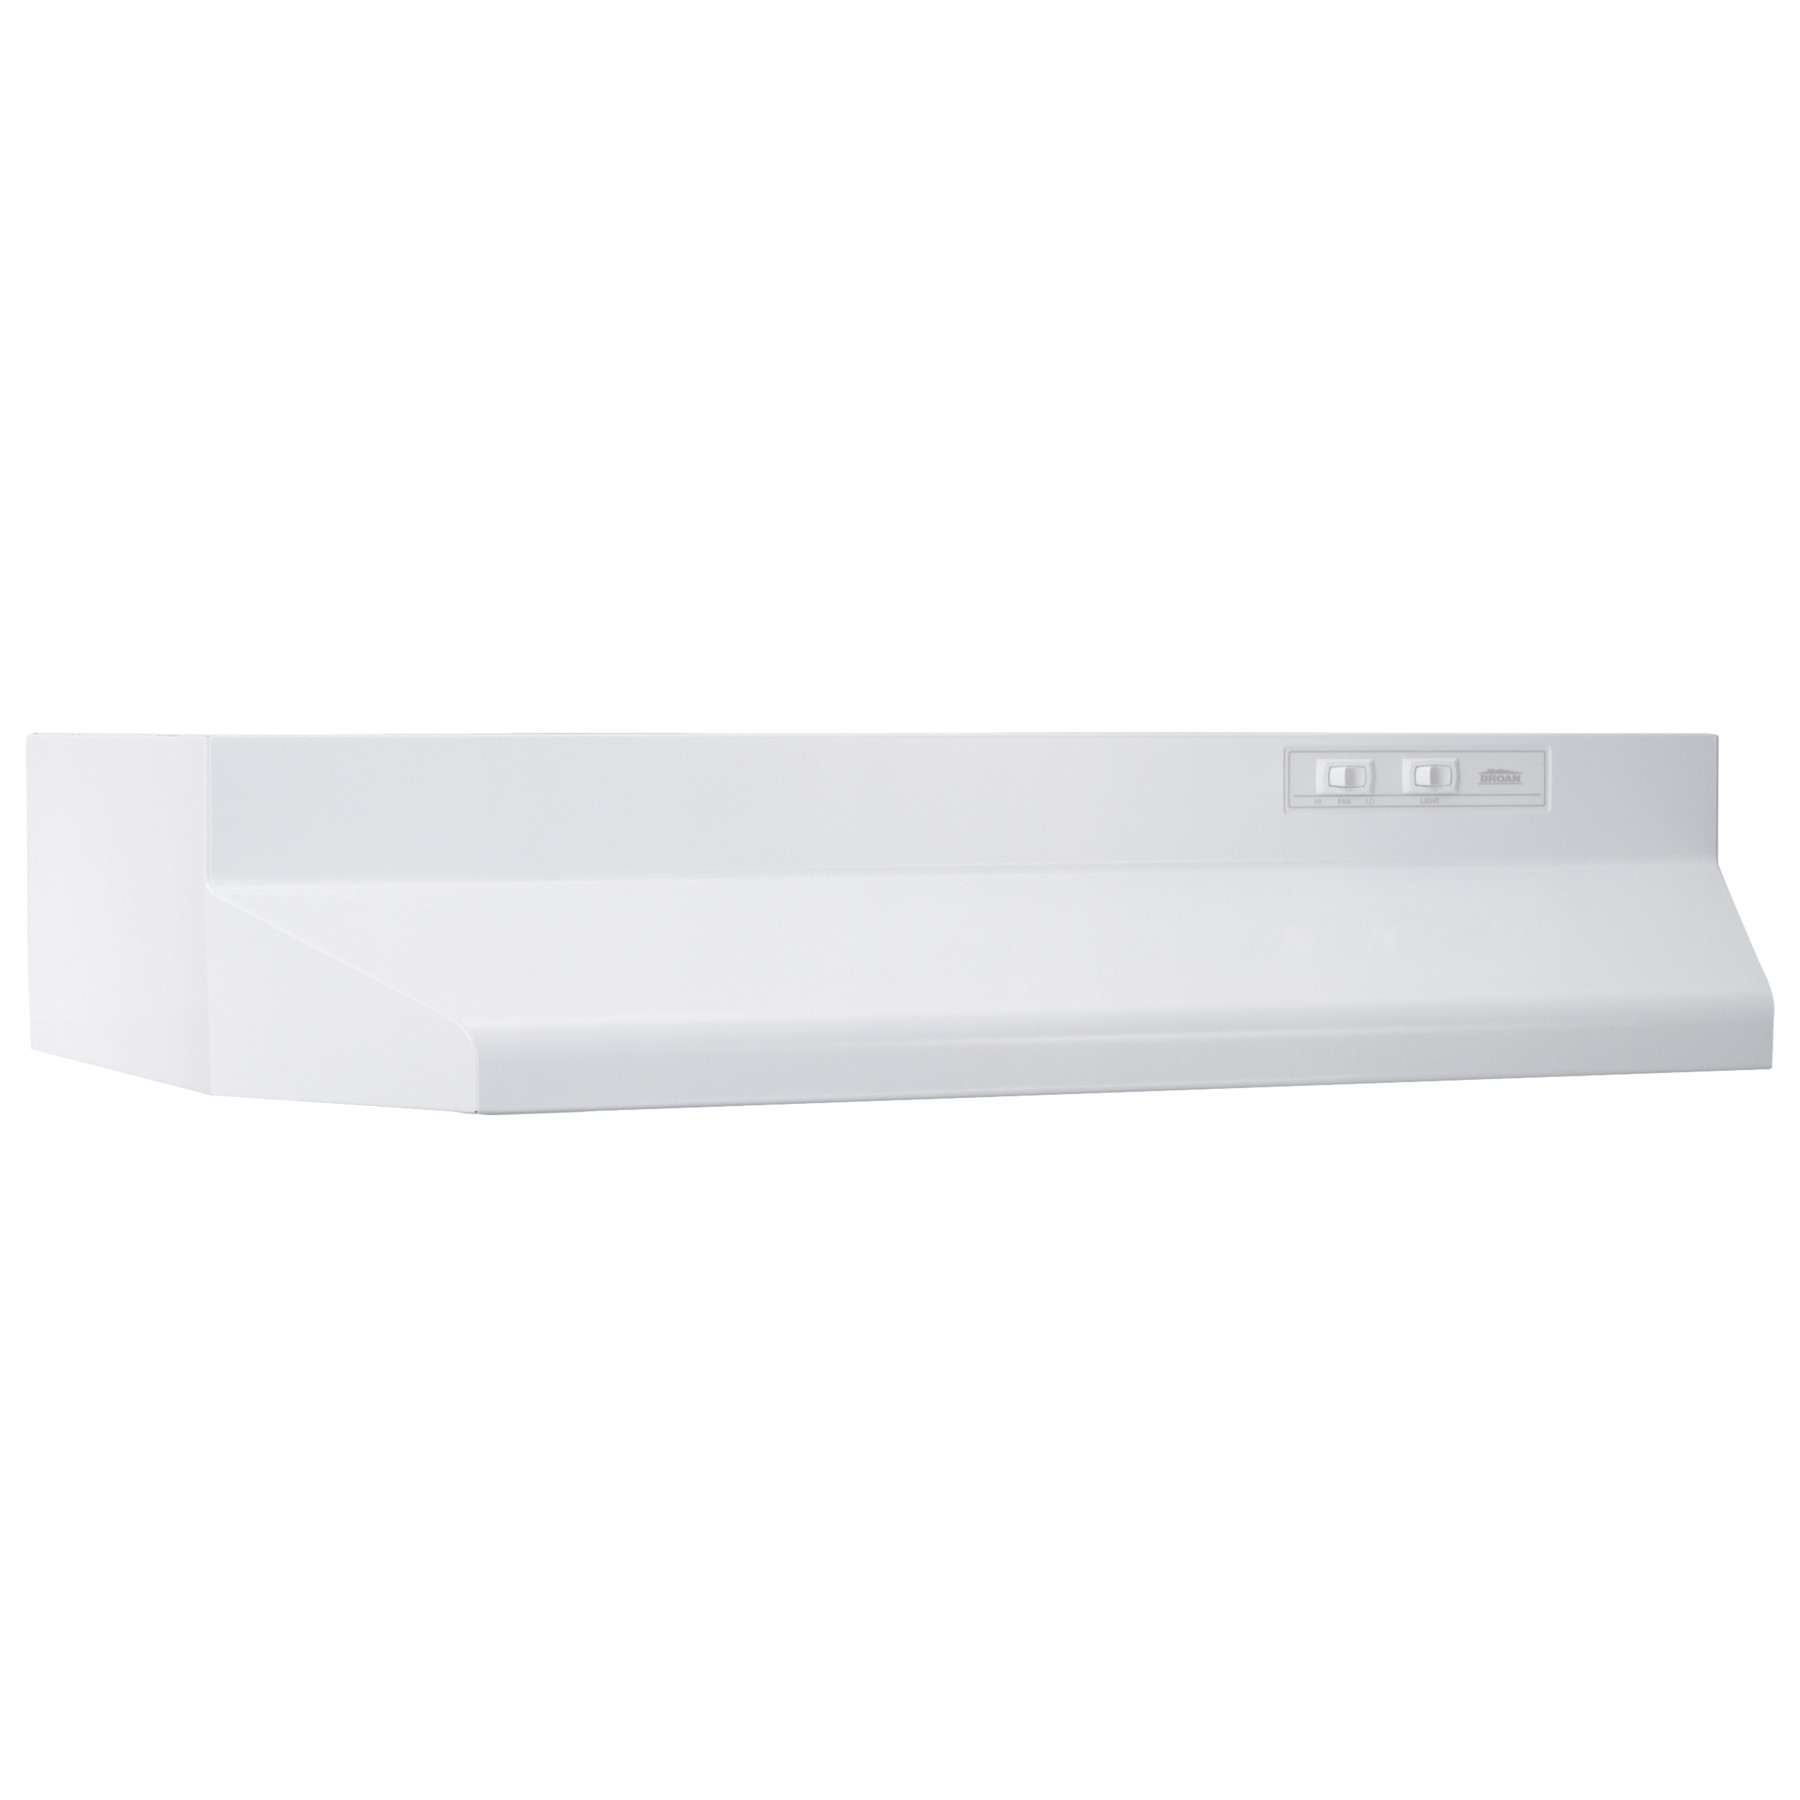 Broan® 30-Inch Ducted Under-Cabinet Range Hood, 210 MAX Blower CFM, White